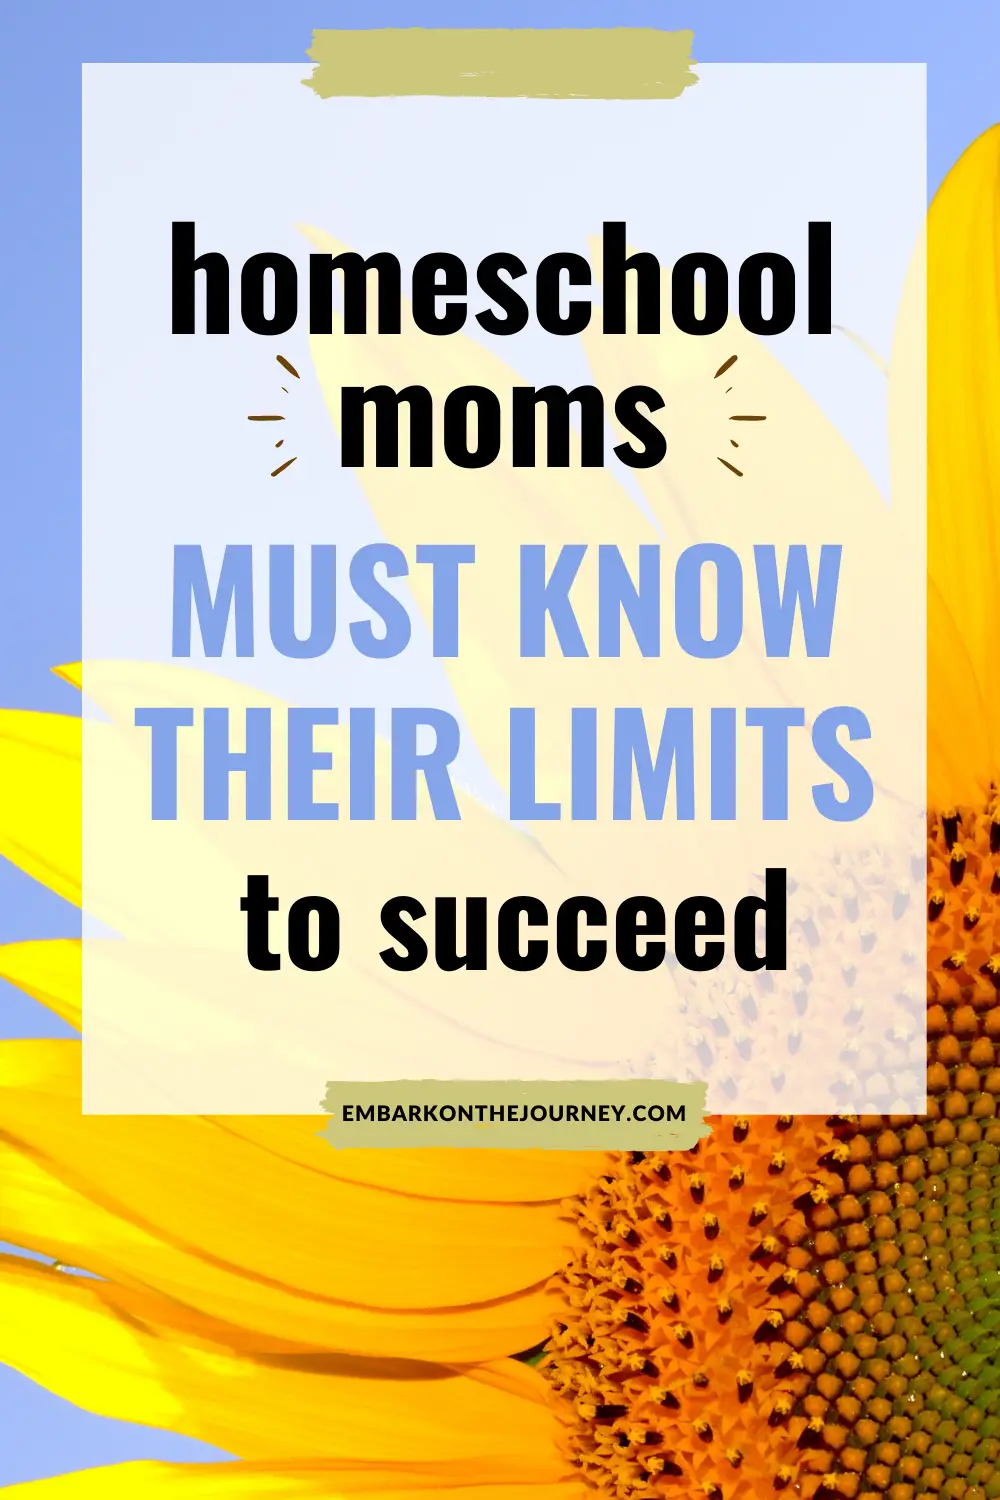 No two homeschools look alike. Everyone's needs are different, and when a homeschool mom knows her limits, she can set herself up for a successful year! 